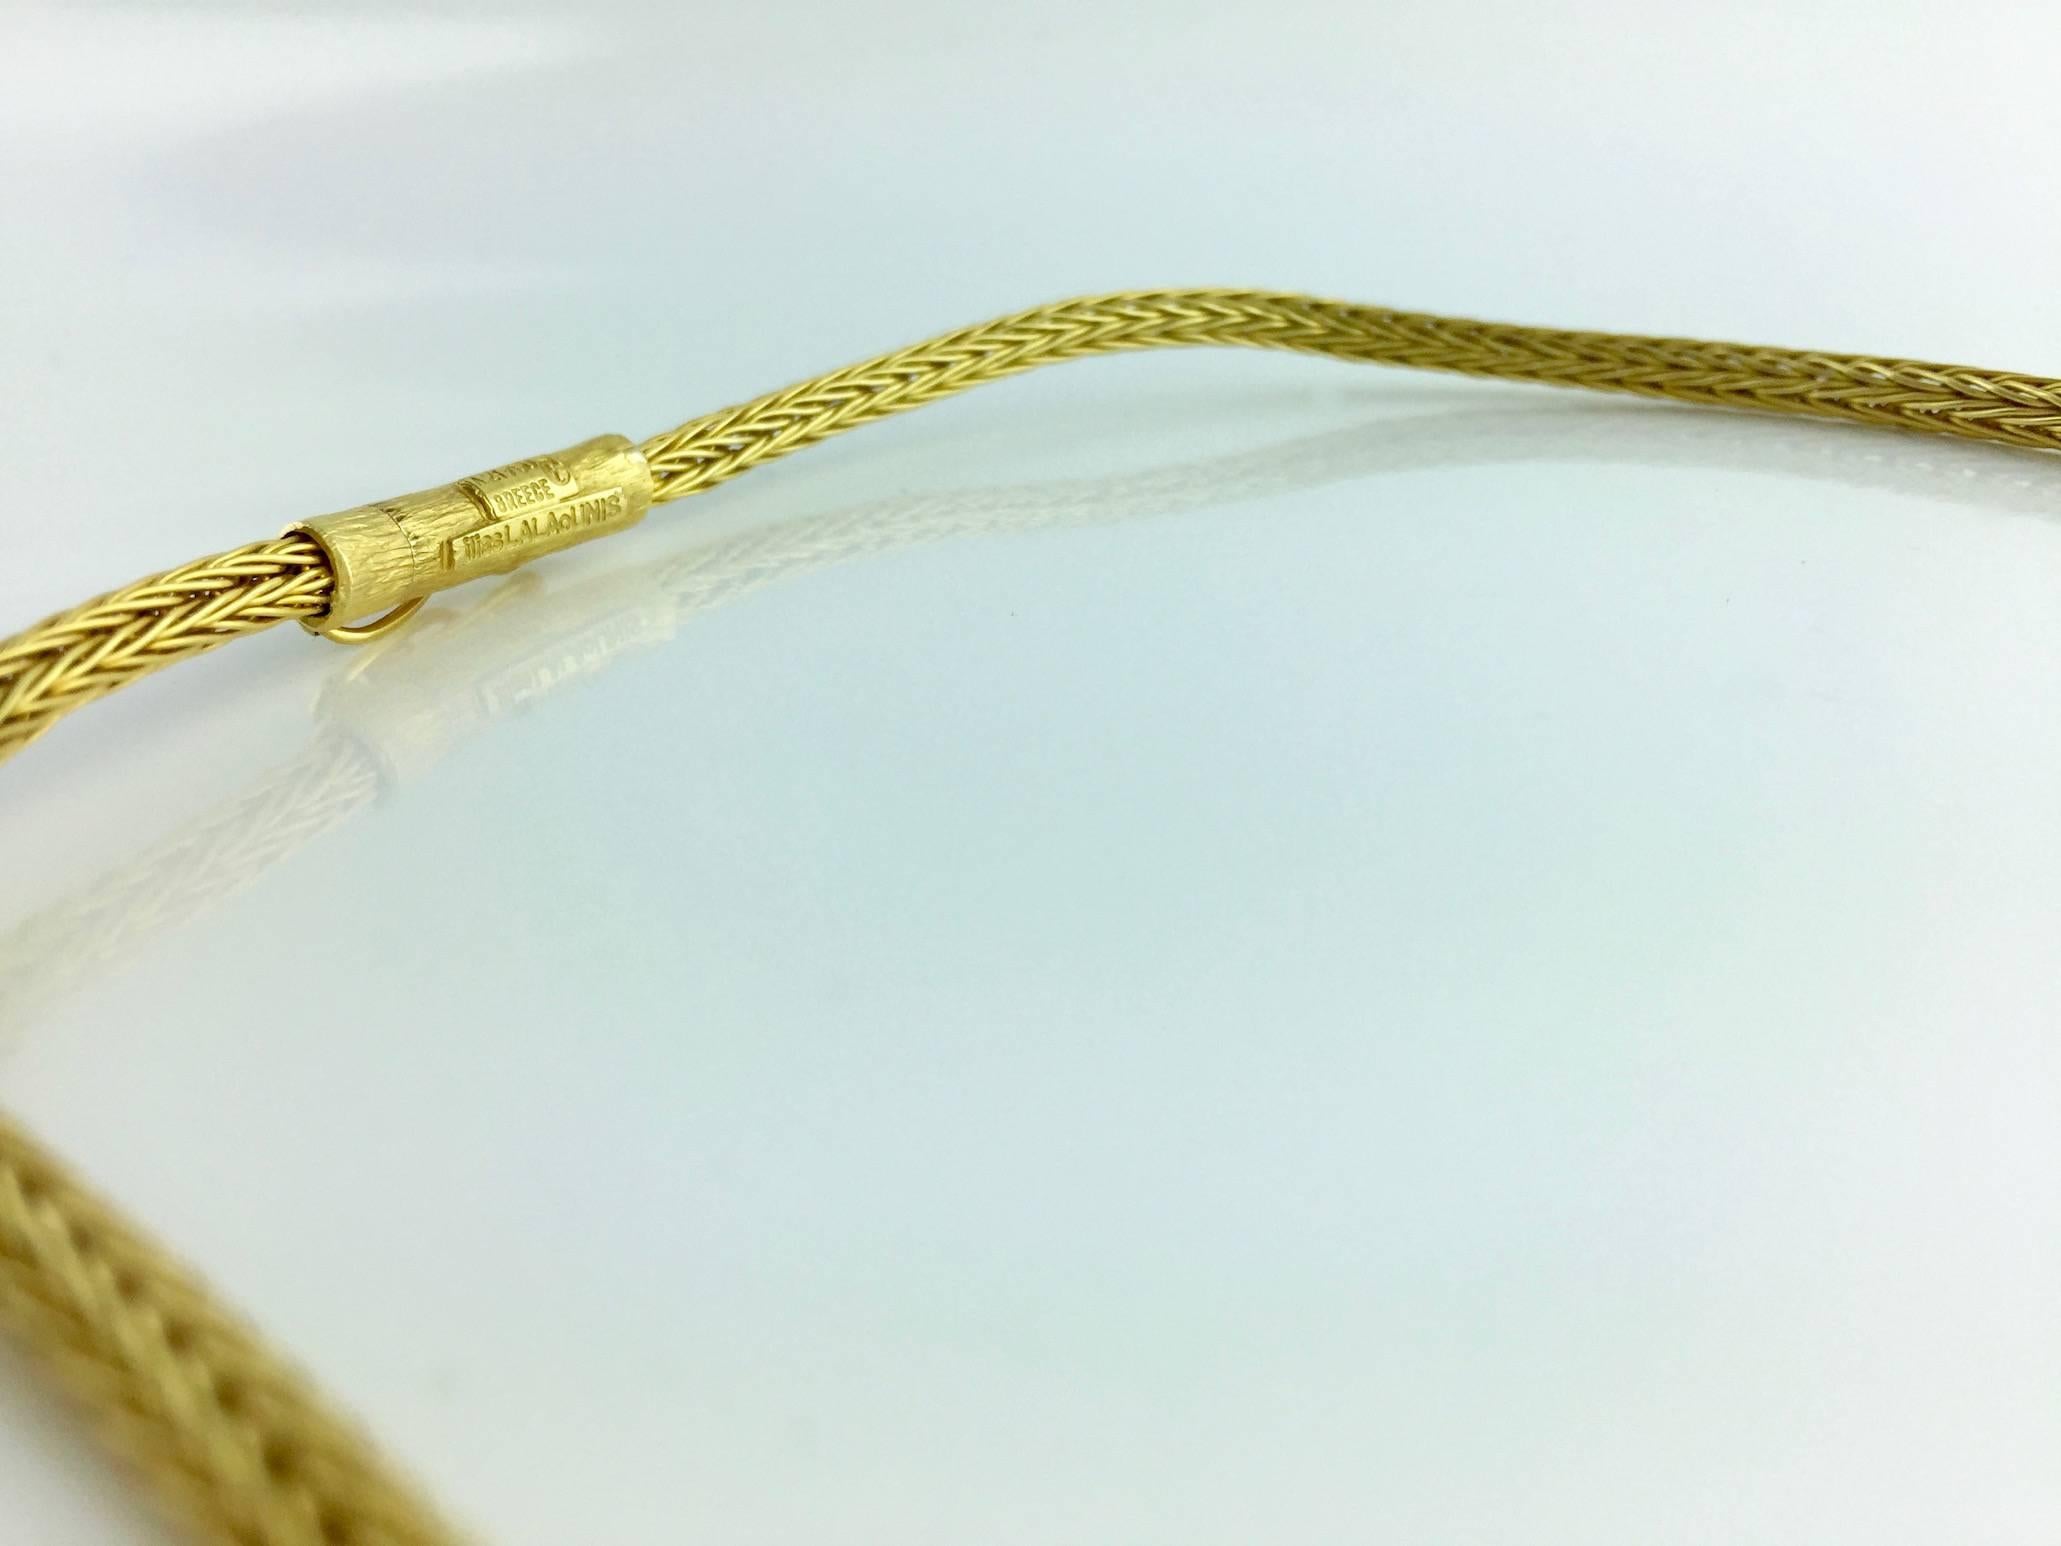 Elegant and Simple necklace in yellow gold 750 18k stylized pattern.
Signed Ilias Lalaounis.
Greek marks.
Circa 1980.

Gross weight: 24.92 grams.